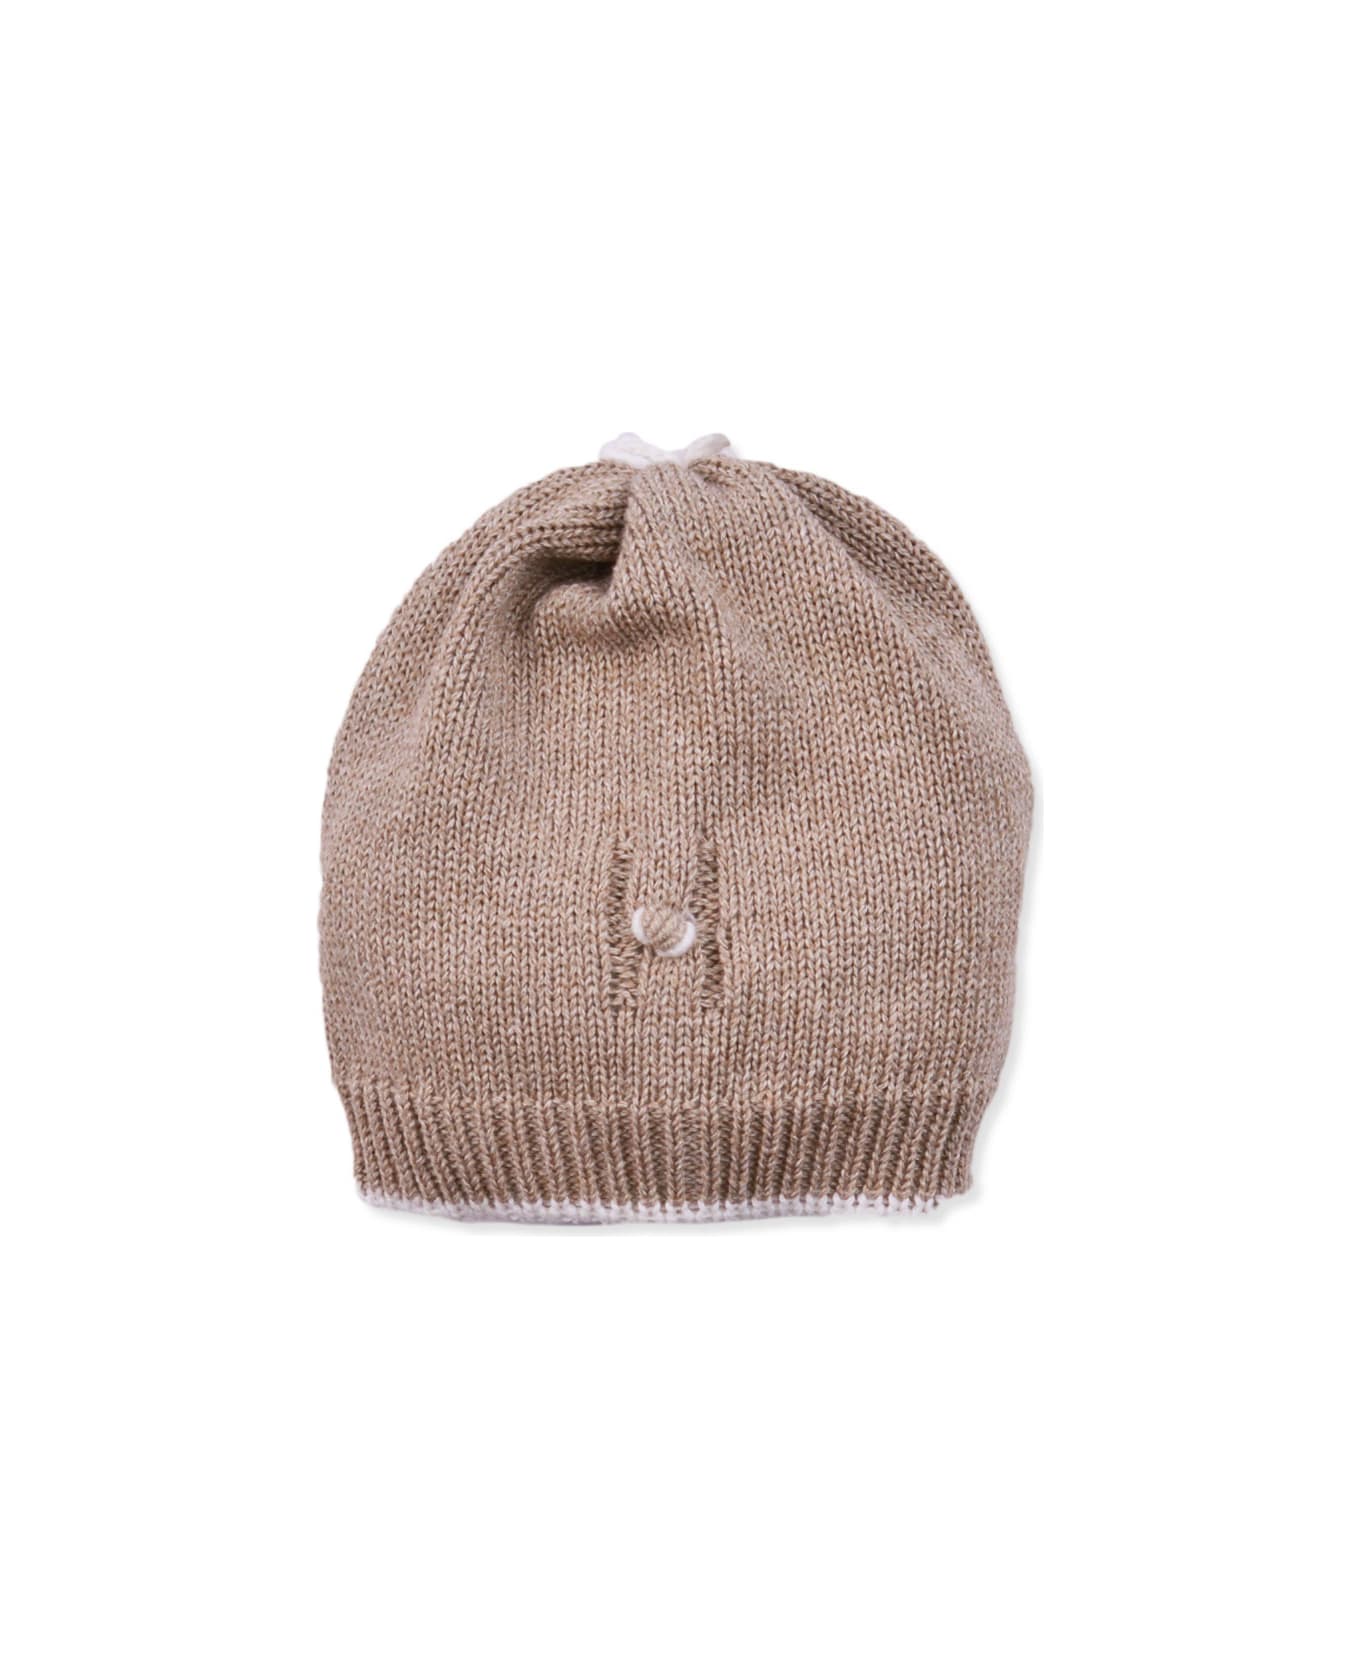 Piccola Giuggiola Cotton Knitted Hat - Brown アクセサリー＆ギフト